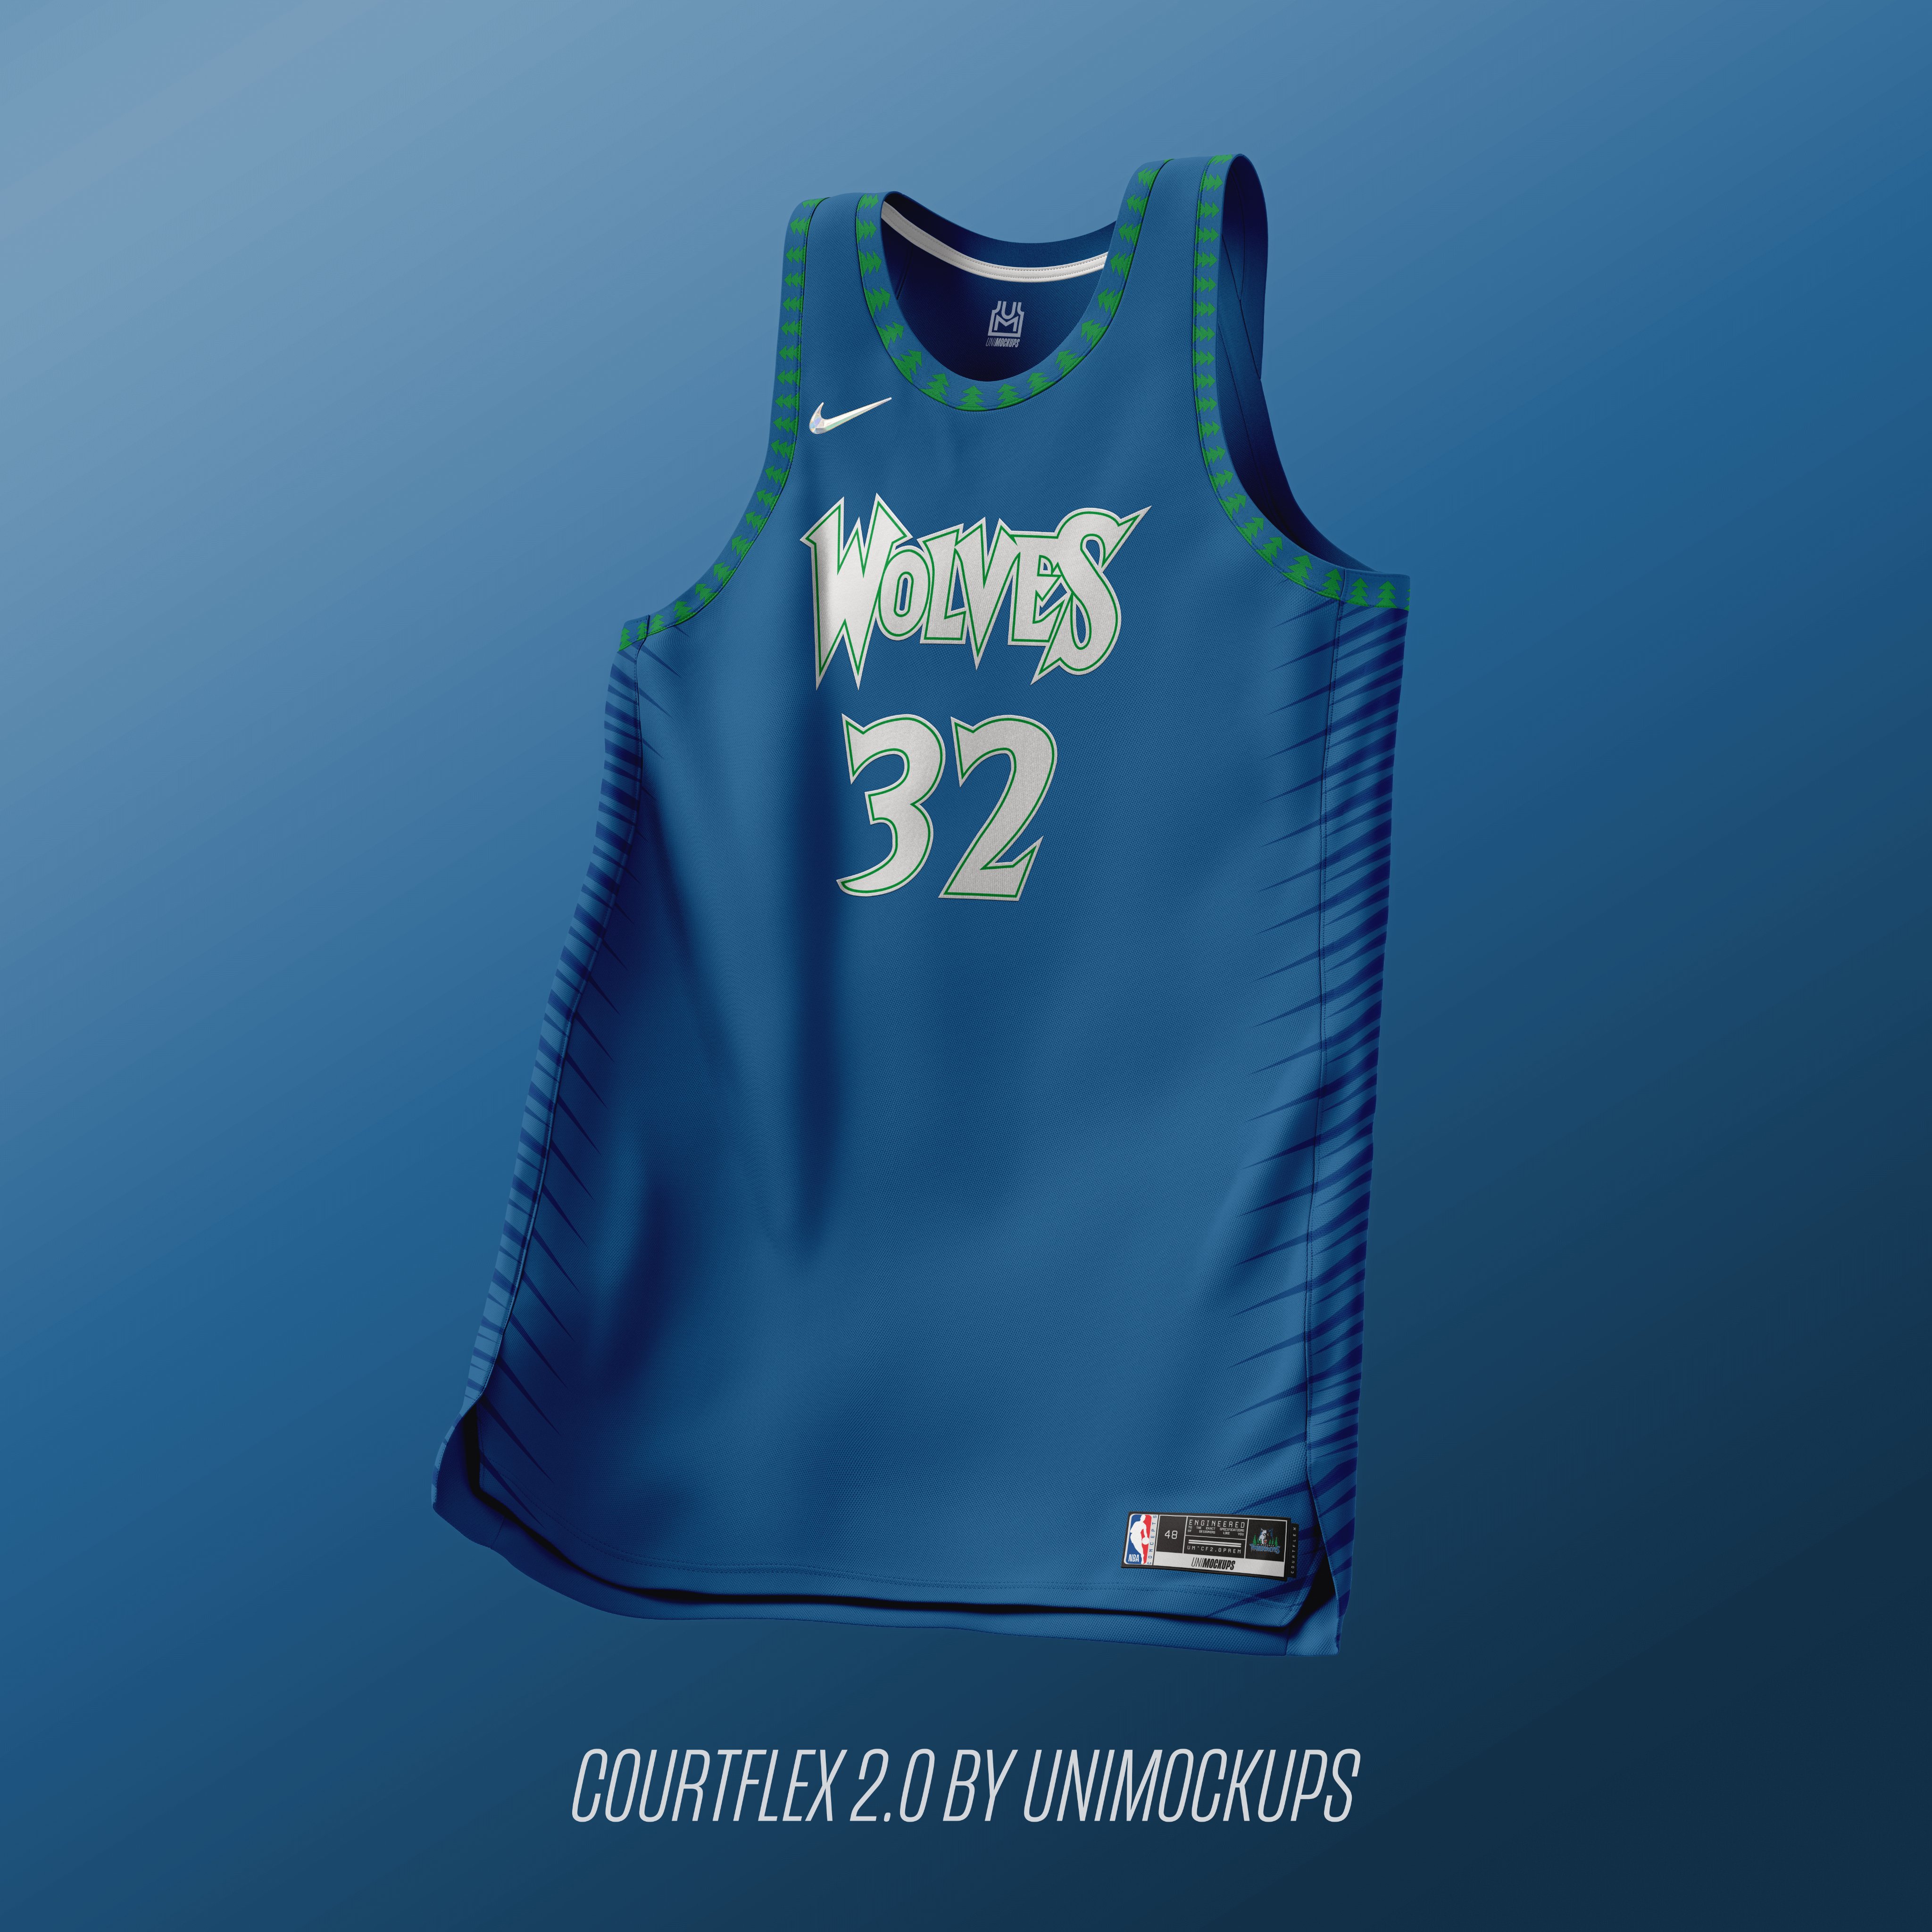 Minnesota Timberwolves 2022-23 City Edition jersey has been leaked